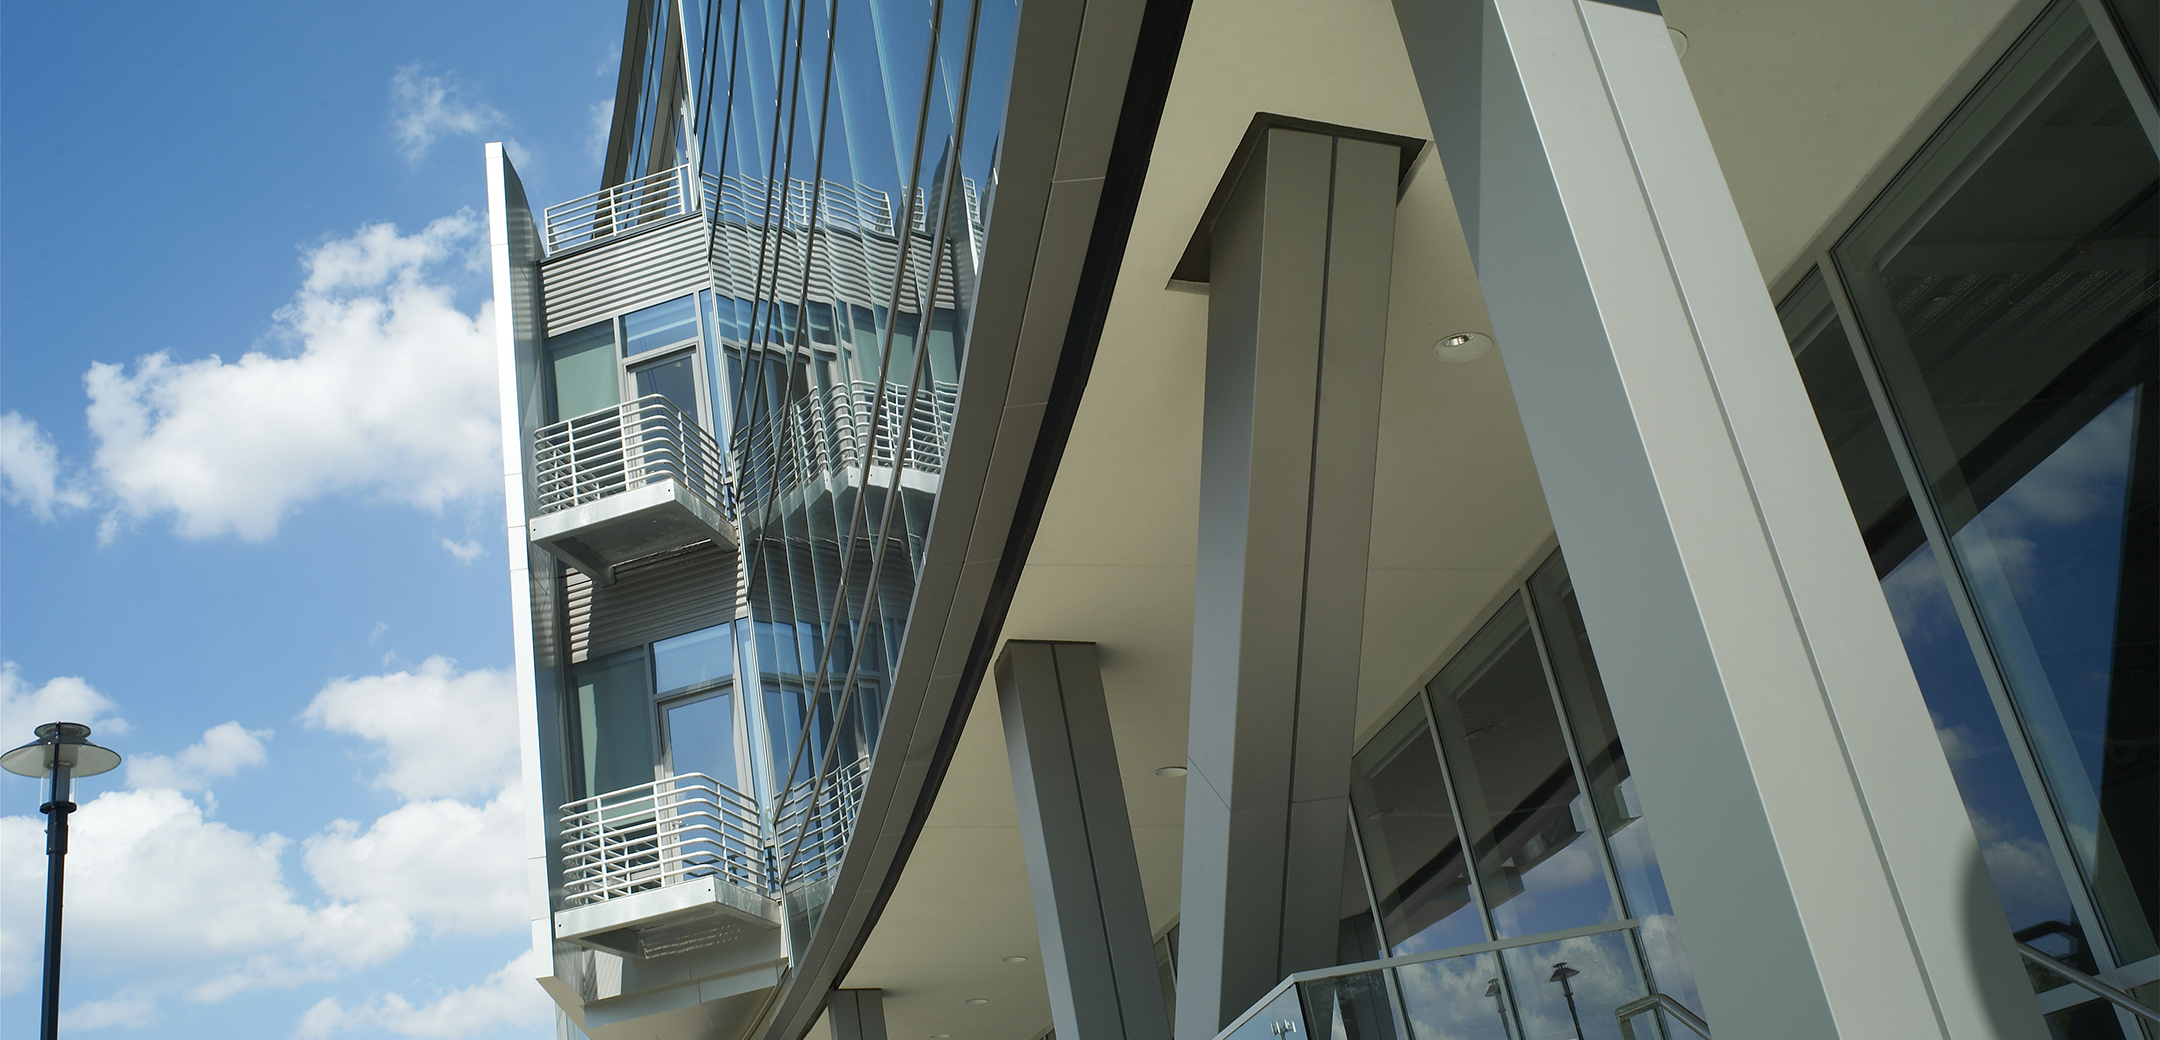 A close up of the overhang feature of the entrance showcasing the balcony in the extruded section of the glass front of the Tasty Baking company headquarters.